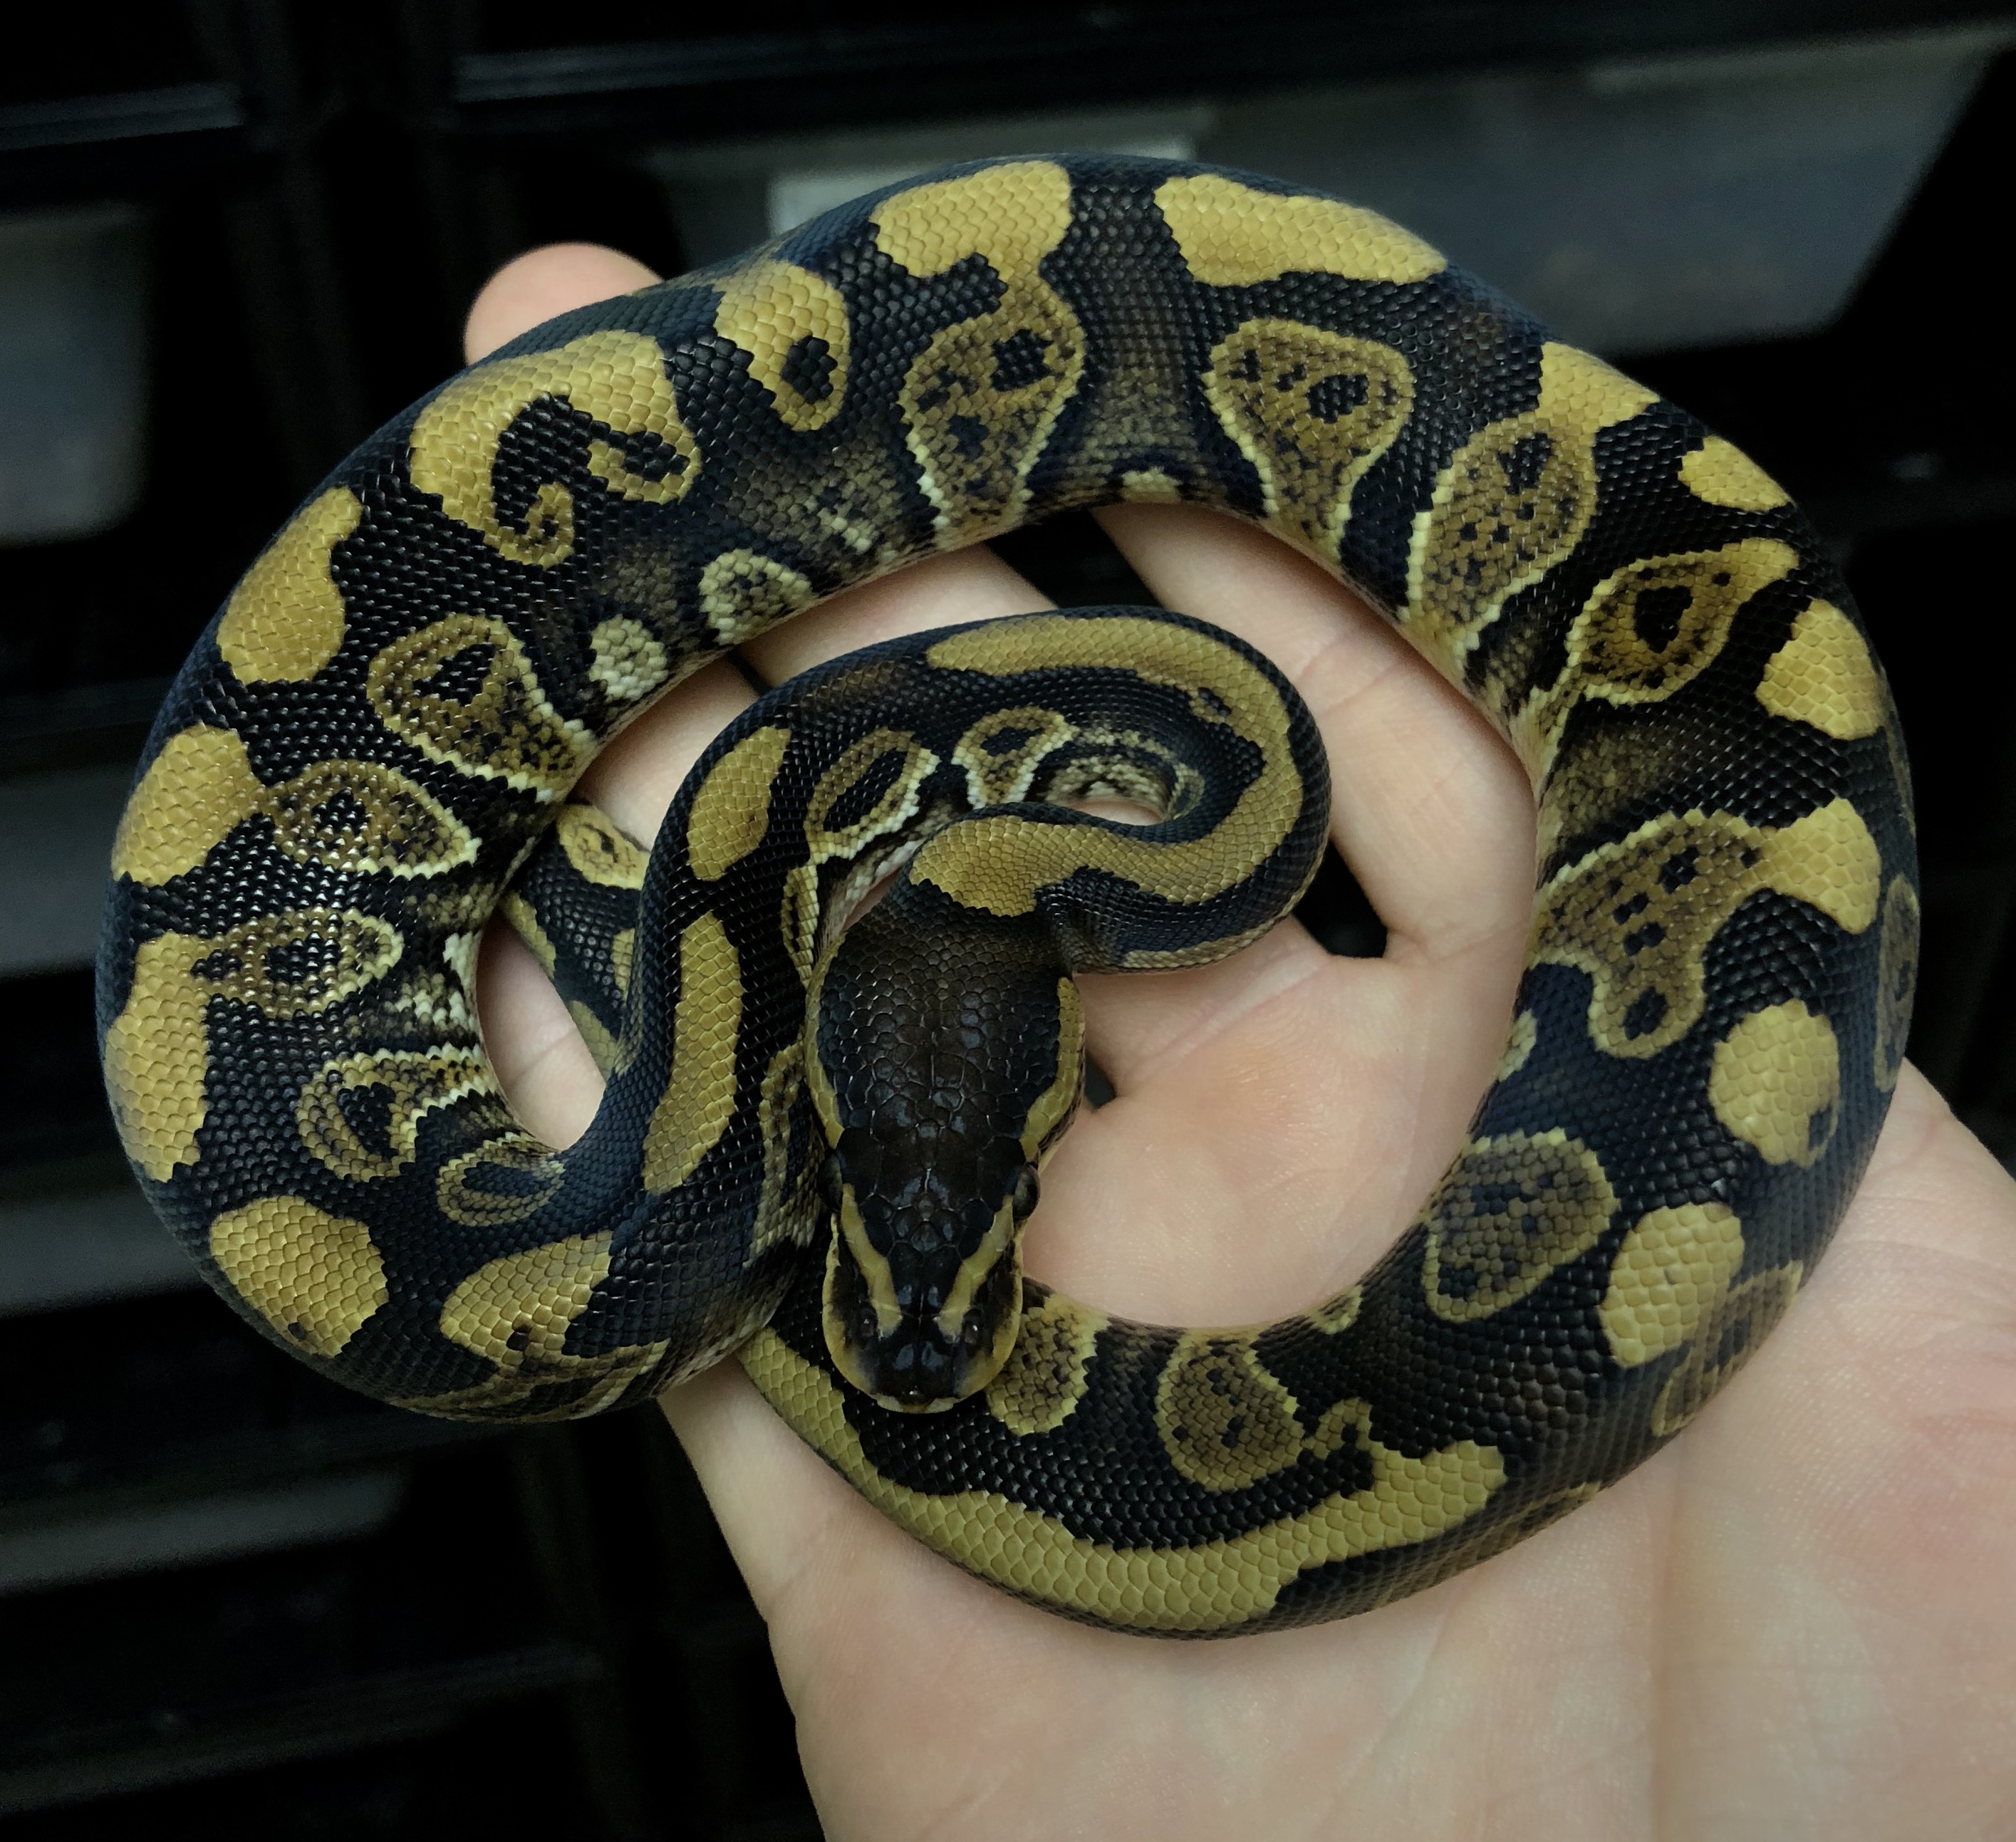 Wookie Ball Python by Genetic Innovations